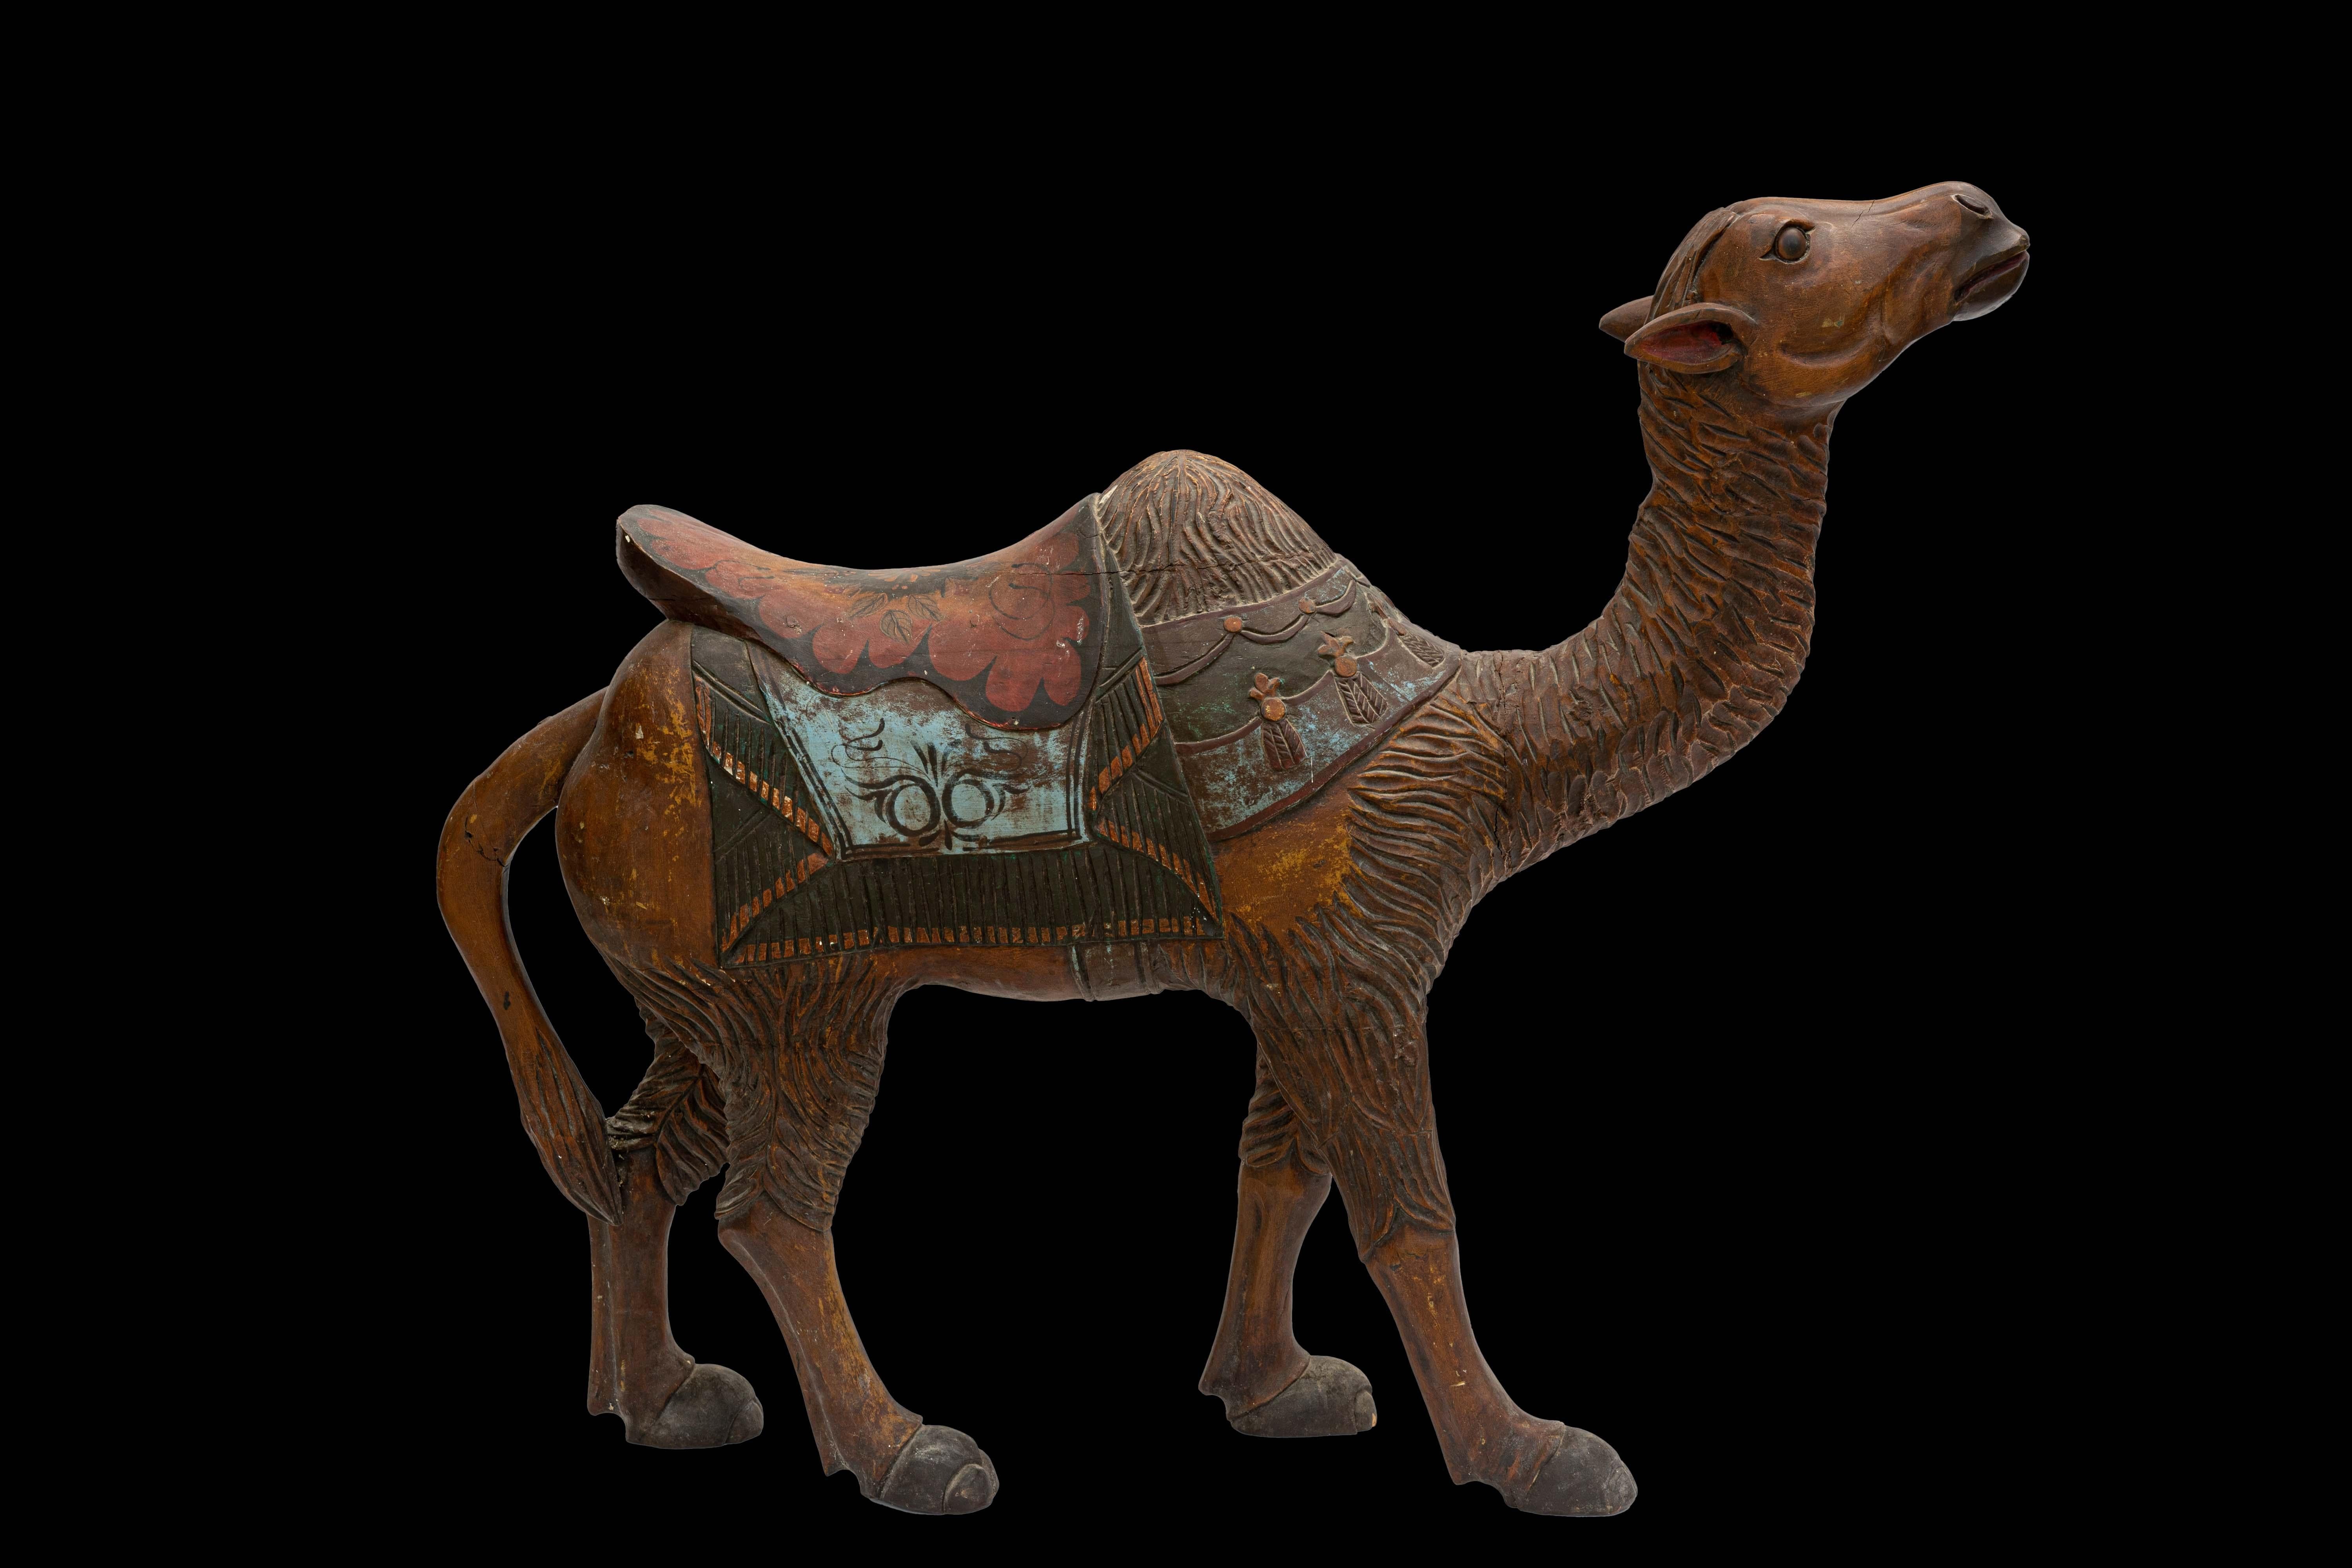 A beautiful carved and painted 19th Century wooden Carousal Camel.

Weighs Approximately: 55lb

Measures Approximately: 12